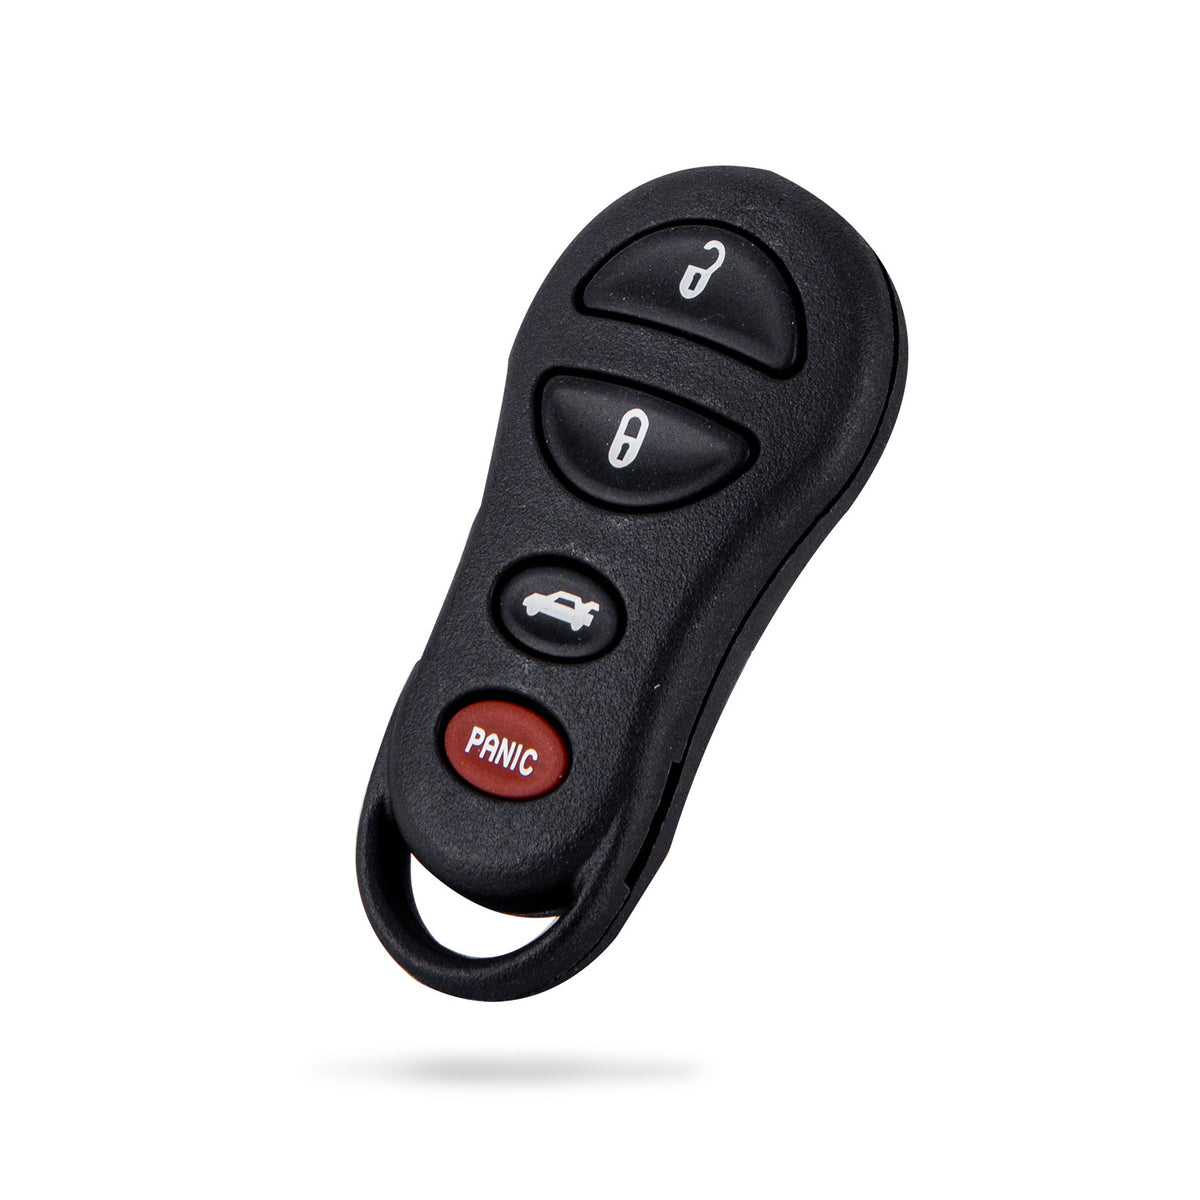 Extra-Partss Car Remote Fob Replacement for GQ43VT17T 04602260 fits 2001 2002 2003 2004 Chrysler 300